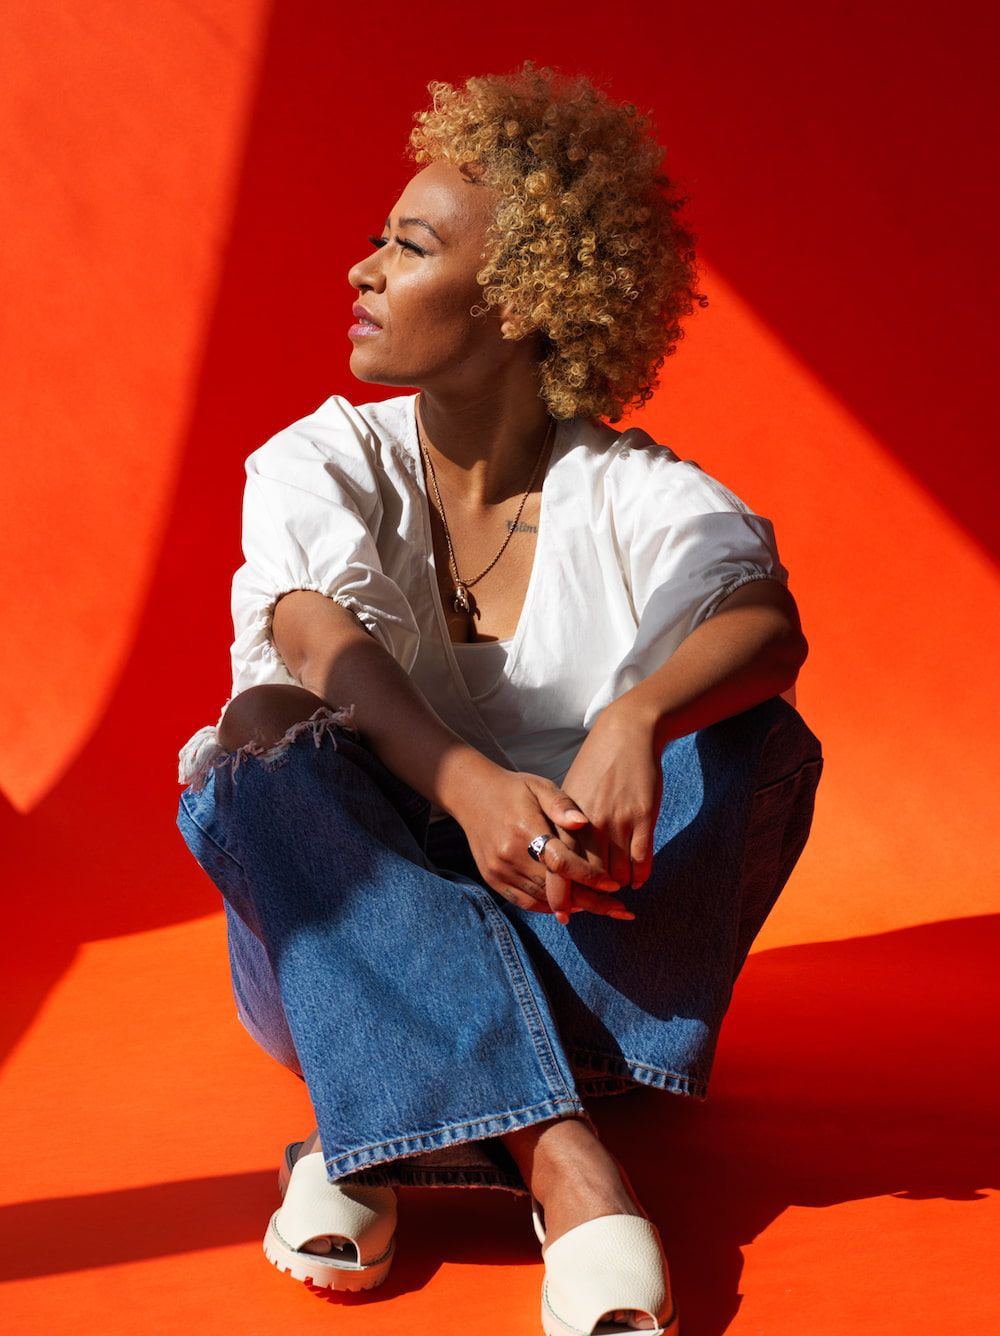 Emeli Sande in a white blouse and jeans, gazing away from the camera